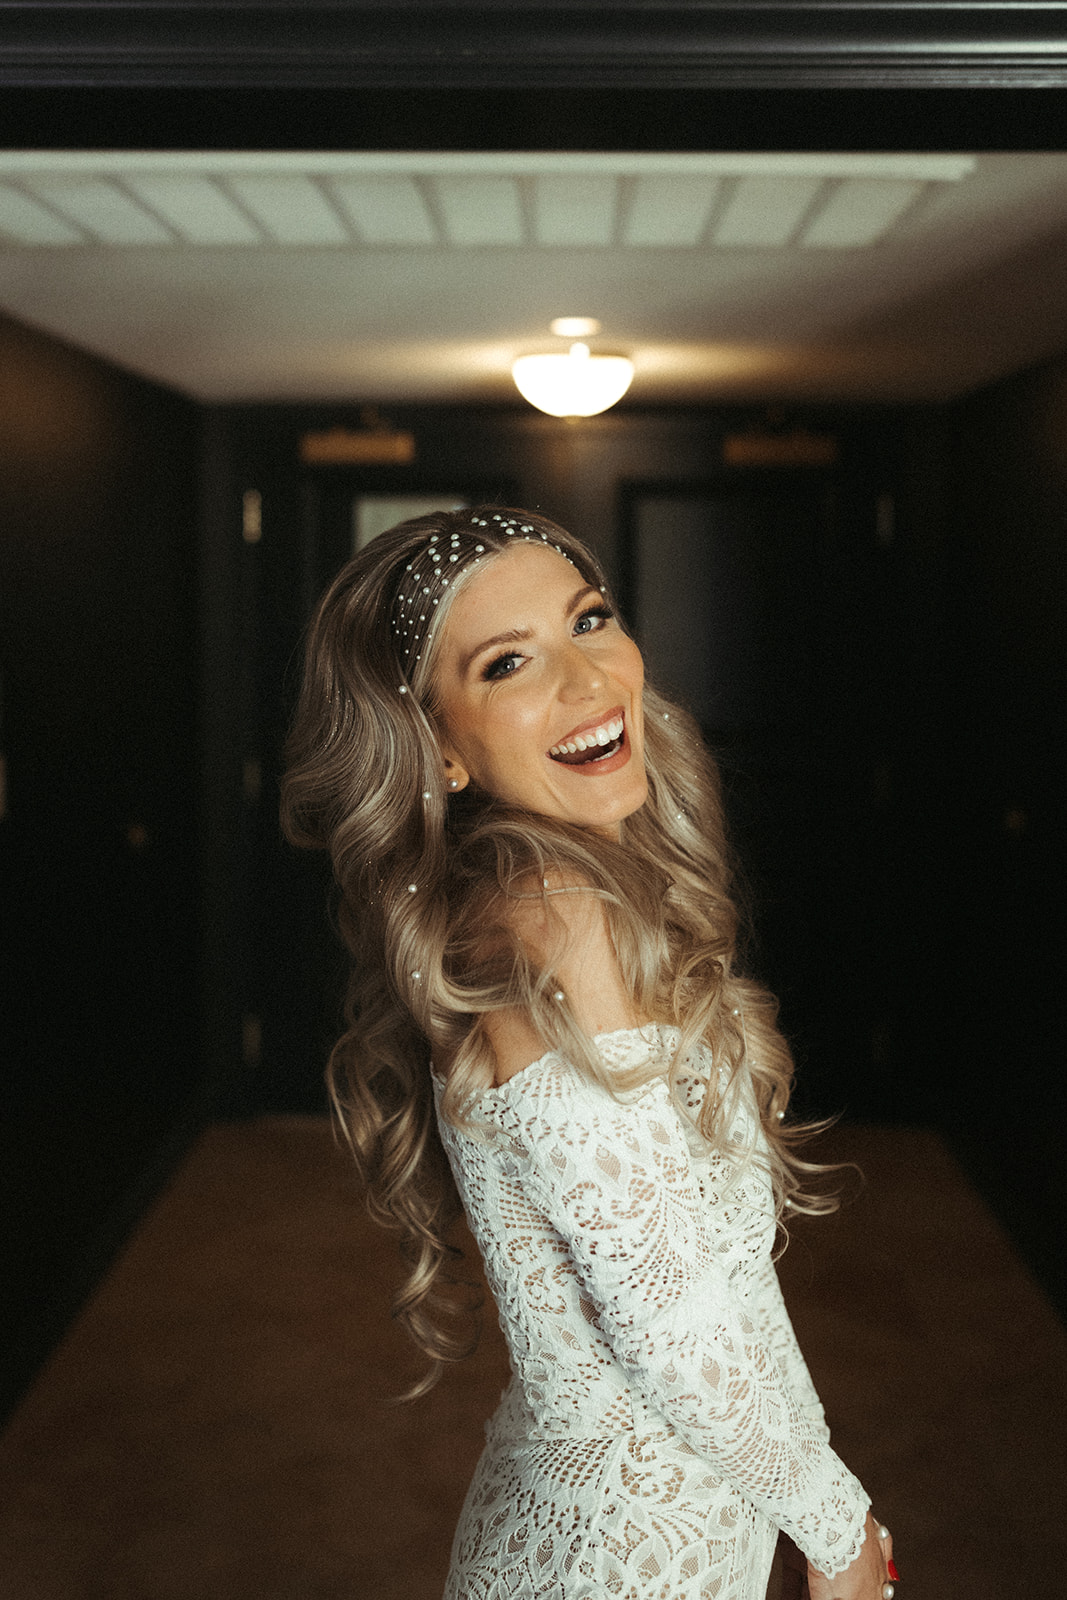 The bride smiling as she gets ready to leave for ceremony